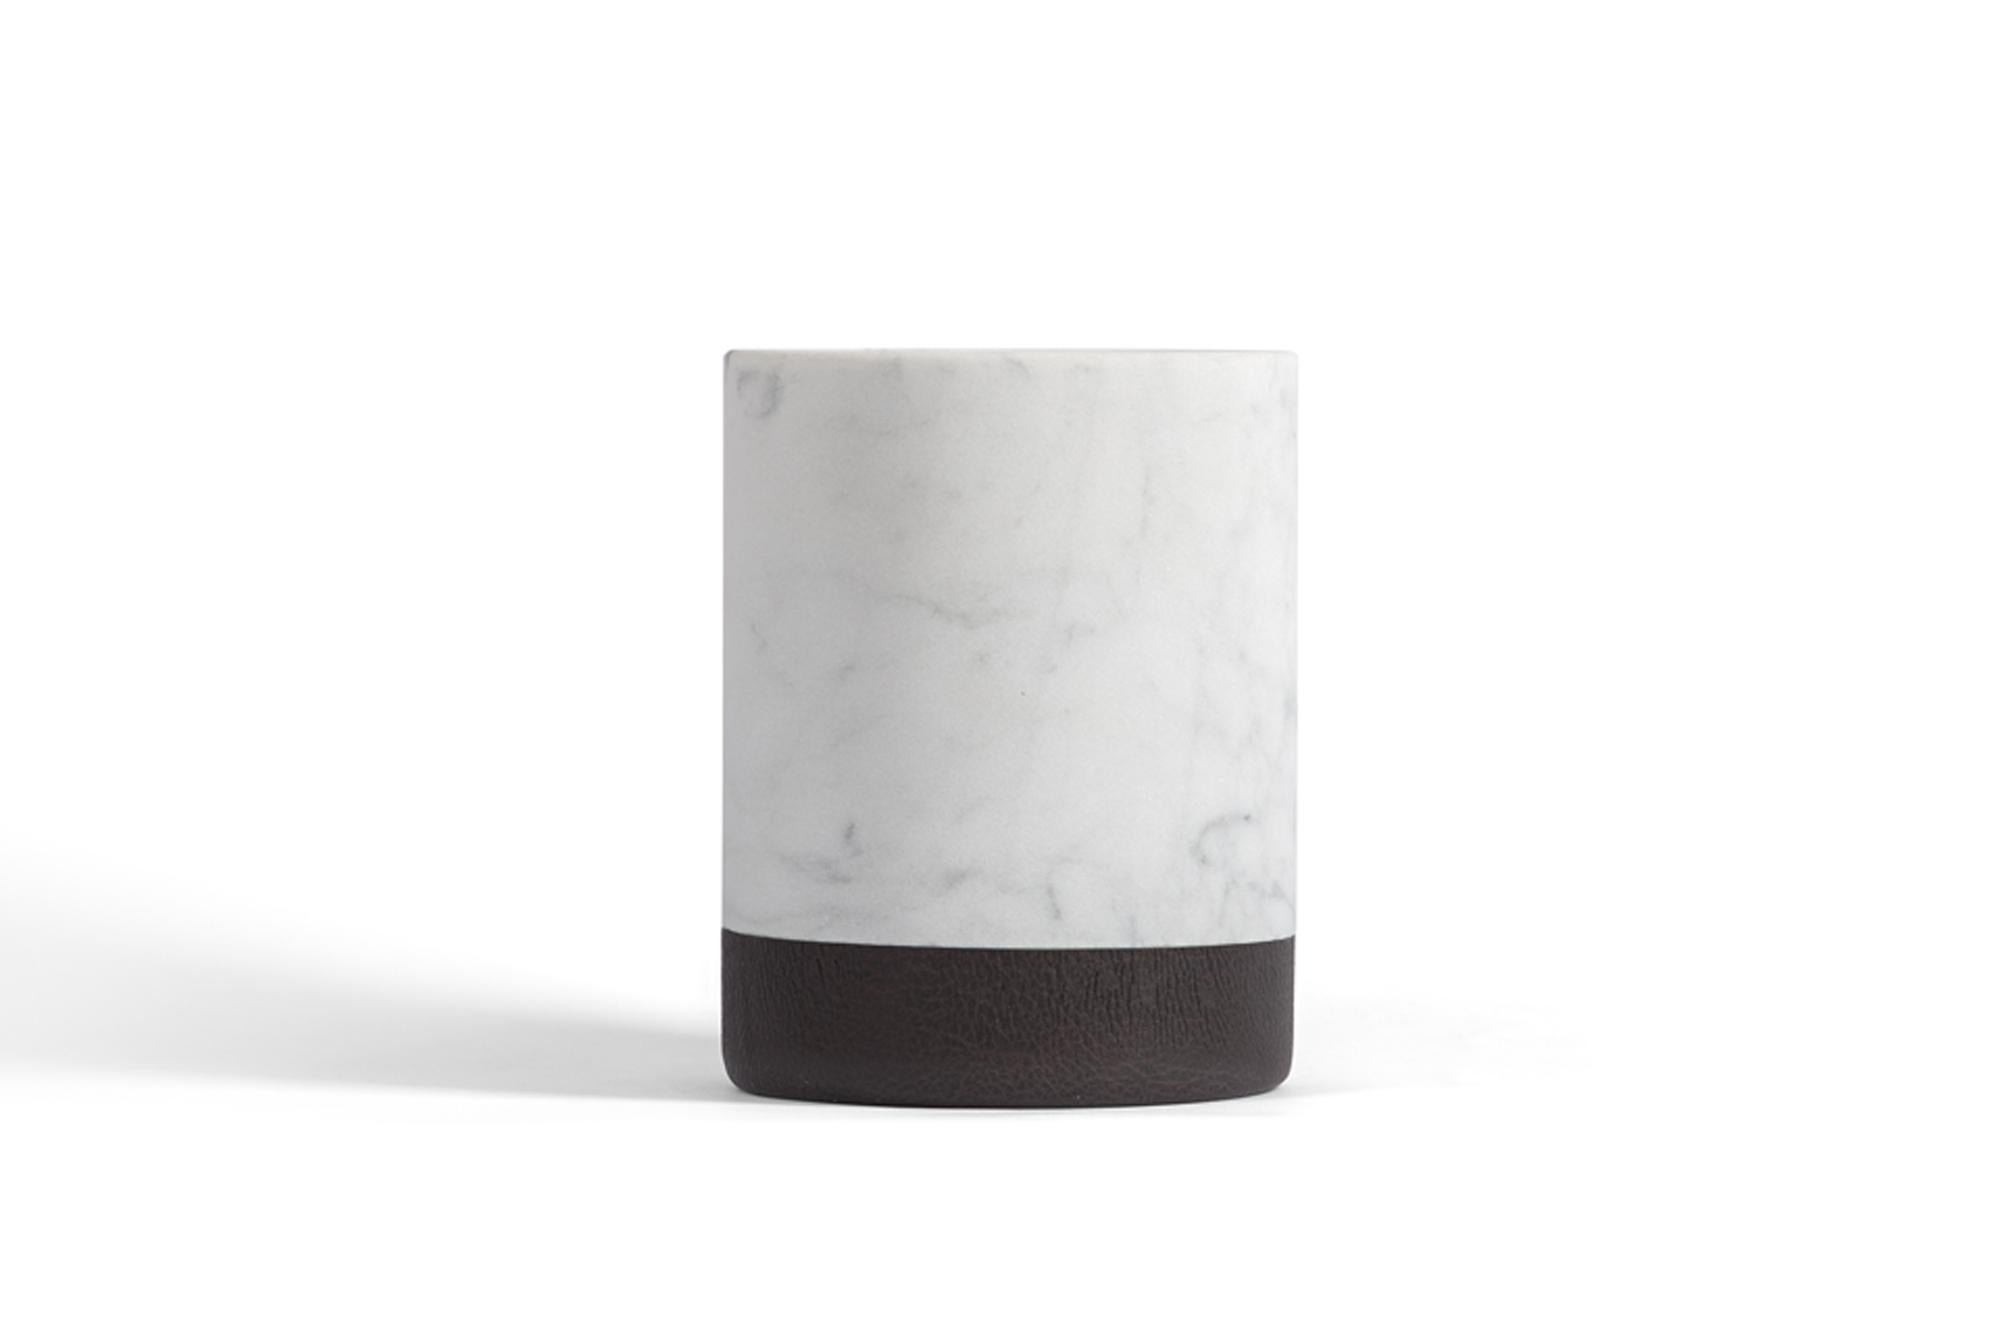 Salvatori Lui&Lei Candle Holder in Bianco Carrara Marble by Vincent Van Duysen For Sale